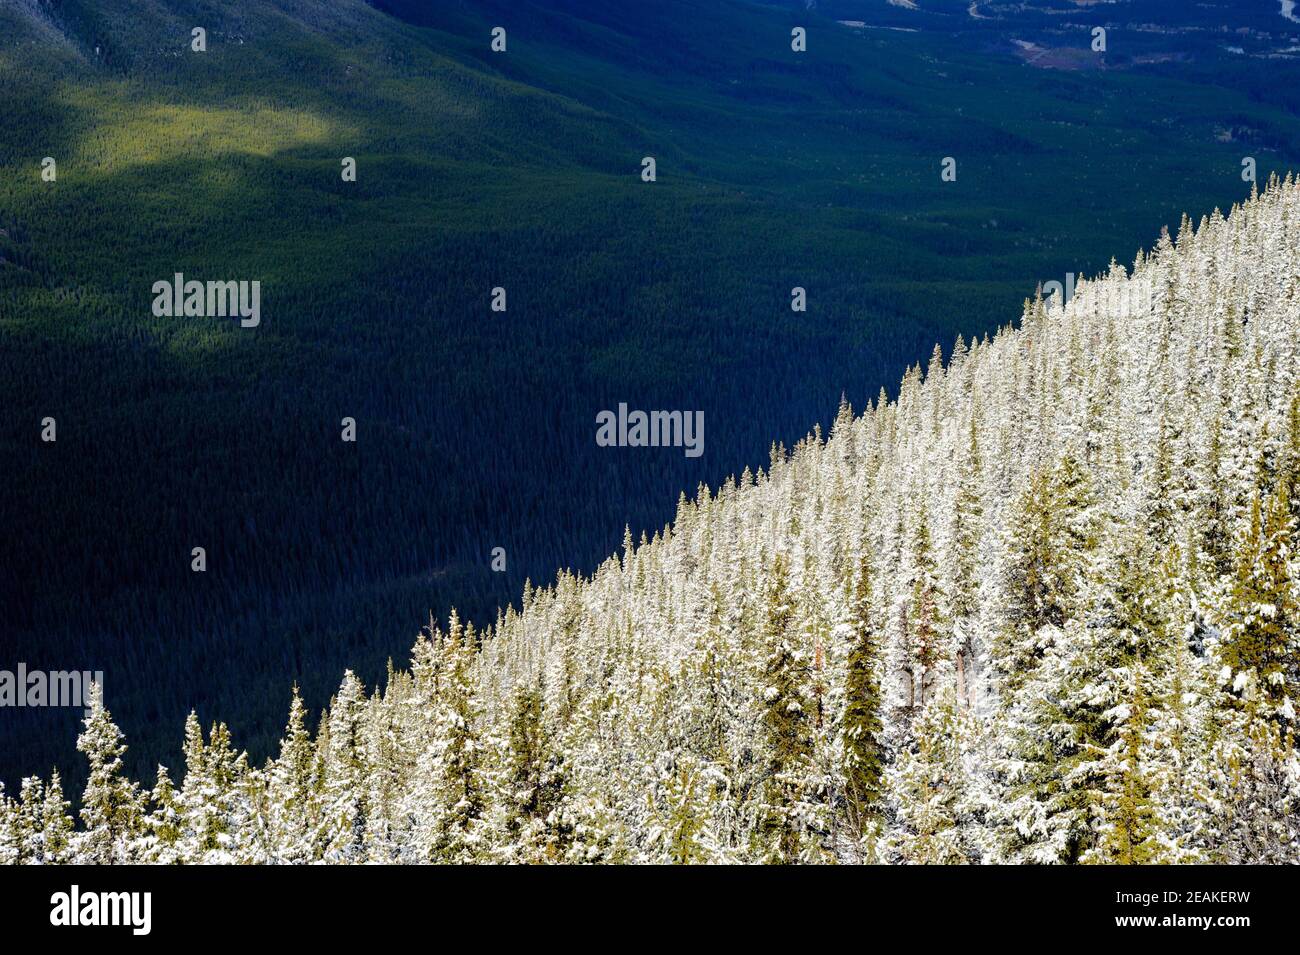 Bright snow covered trees on mountain slope. Stock Photo